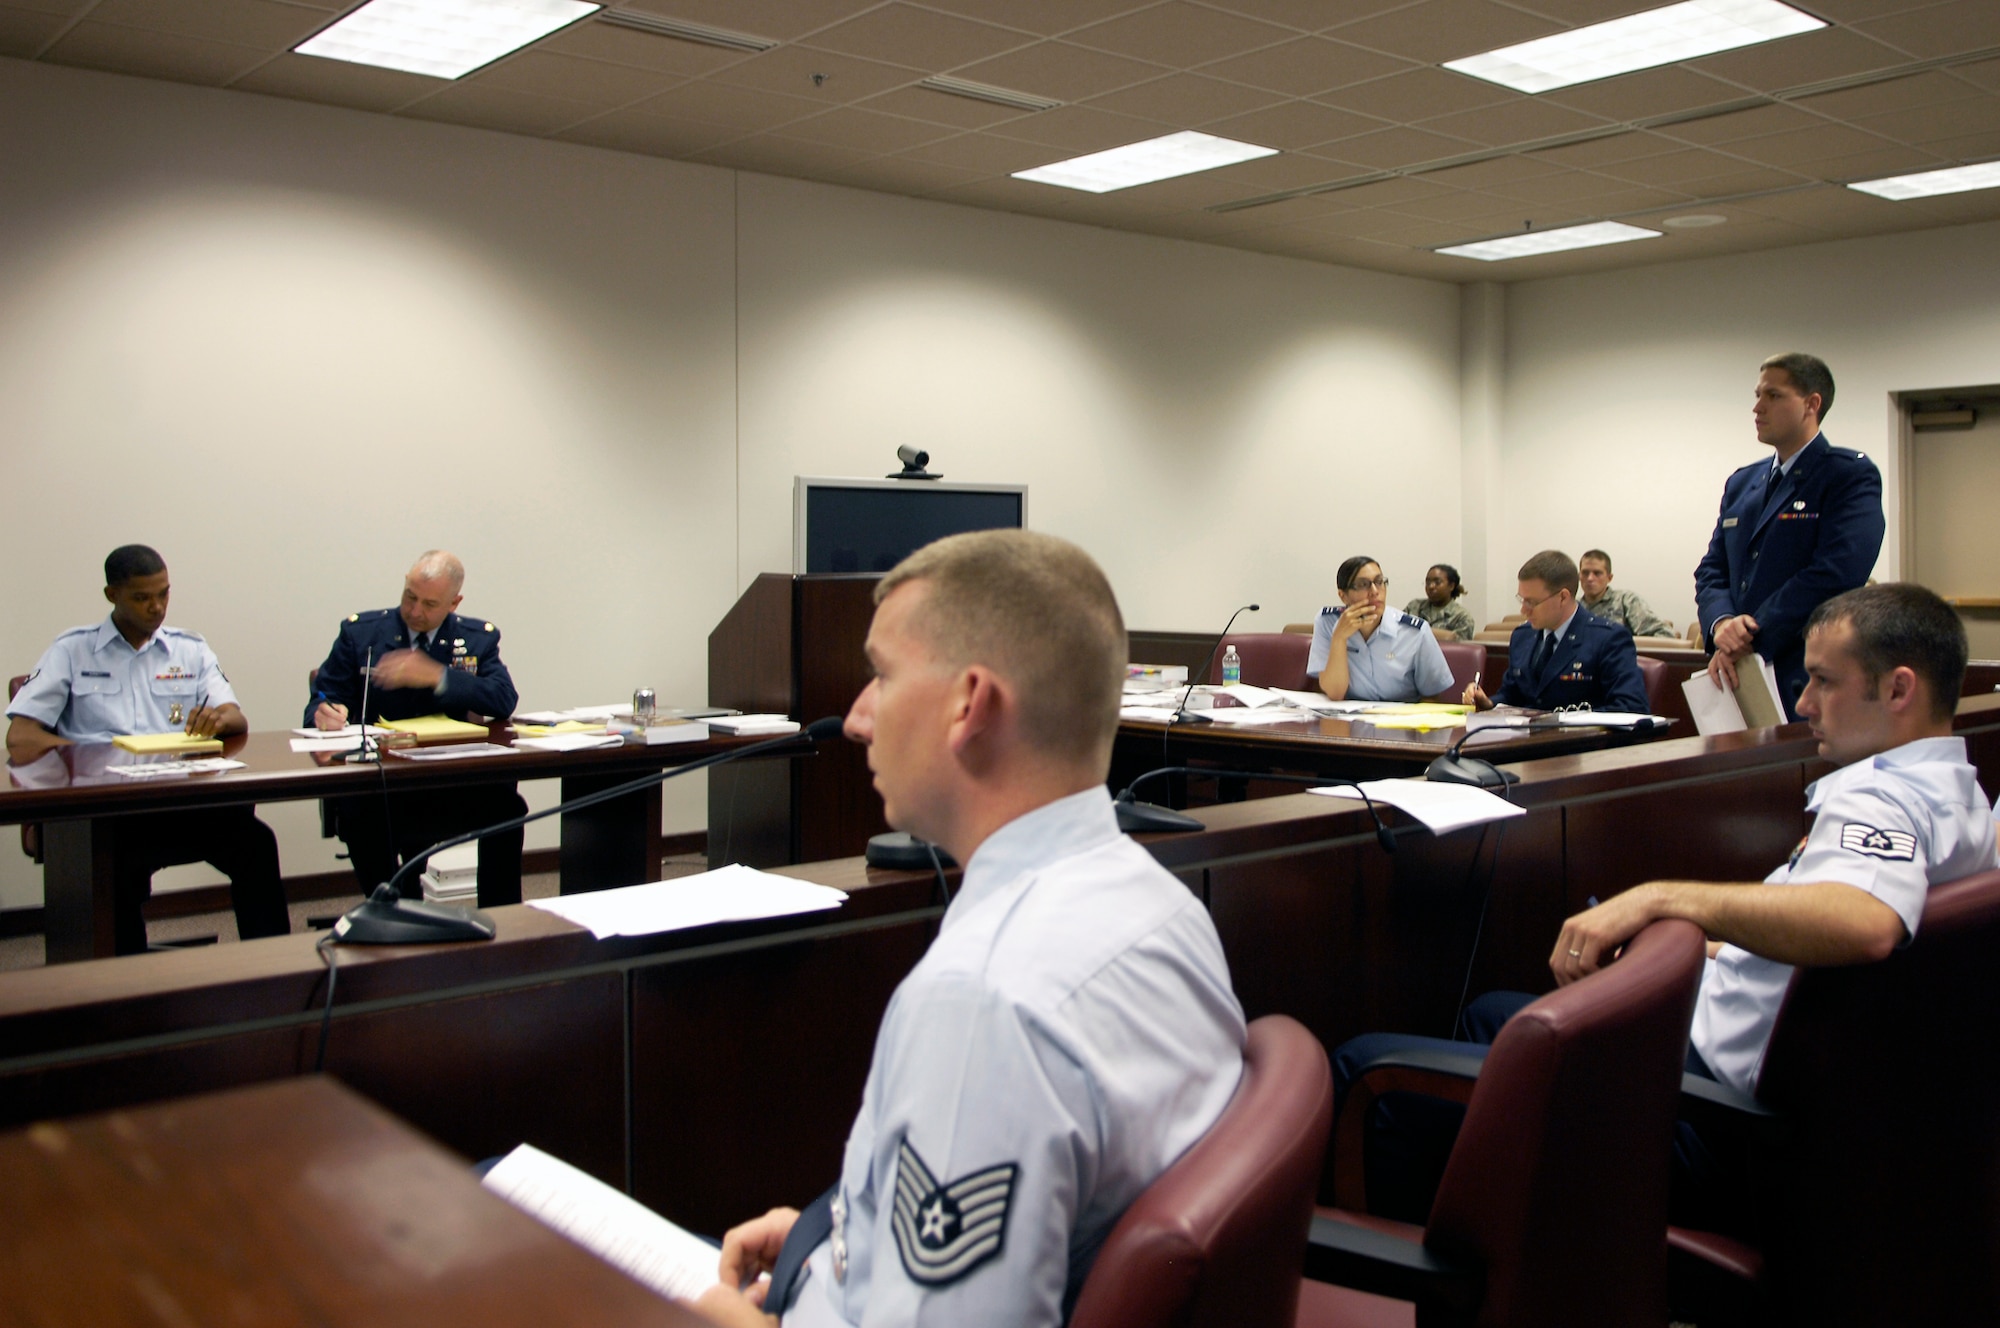 WHITEMAN AIR FORCE BASE, Mo. - Members of the 509th Security Forces Squadron and the 509th Bomb Wing Legal Office listen to witnesses testimony May 13 during a simulated trial. The two sections conducted a week-long exercise to show how each operated. (U.S. Air force photo/Staff Sgt. Jason Barebo)